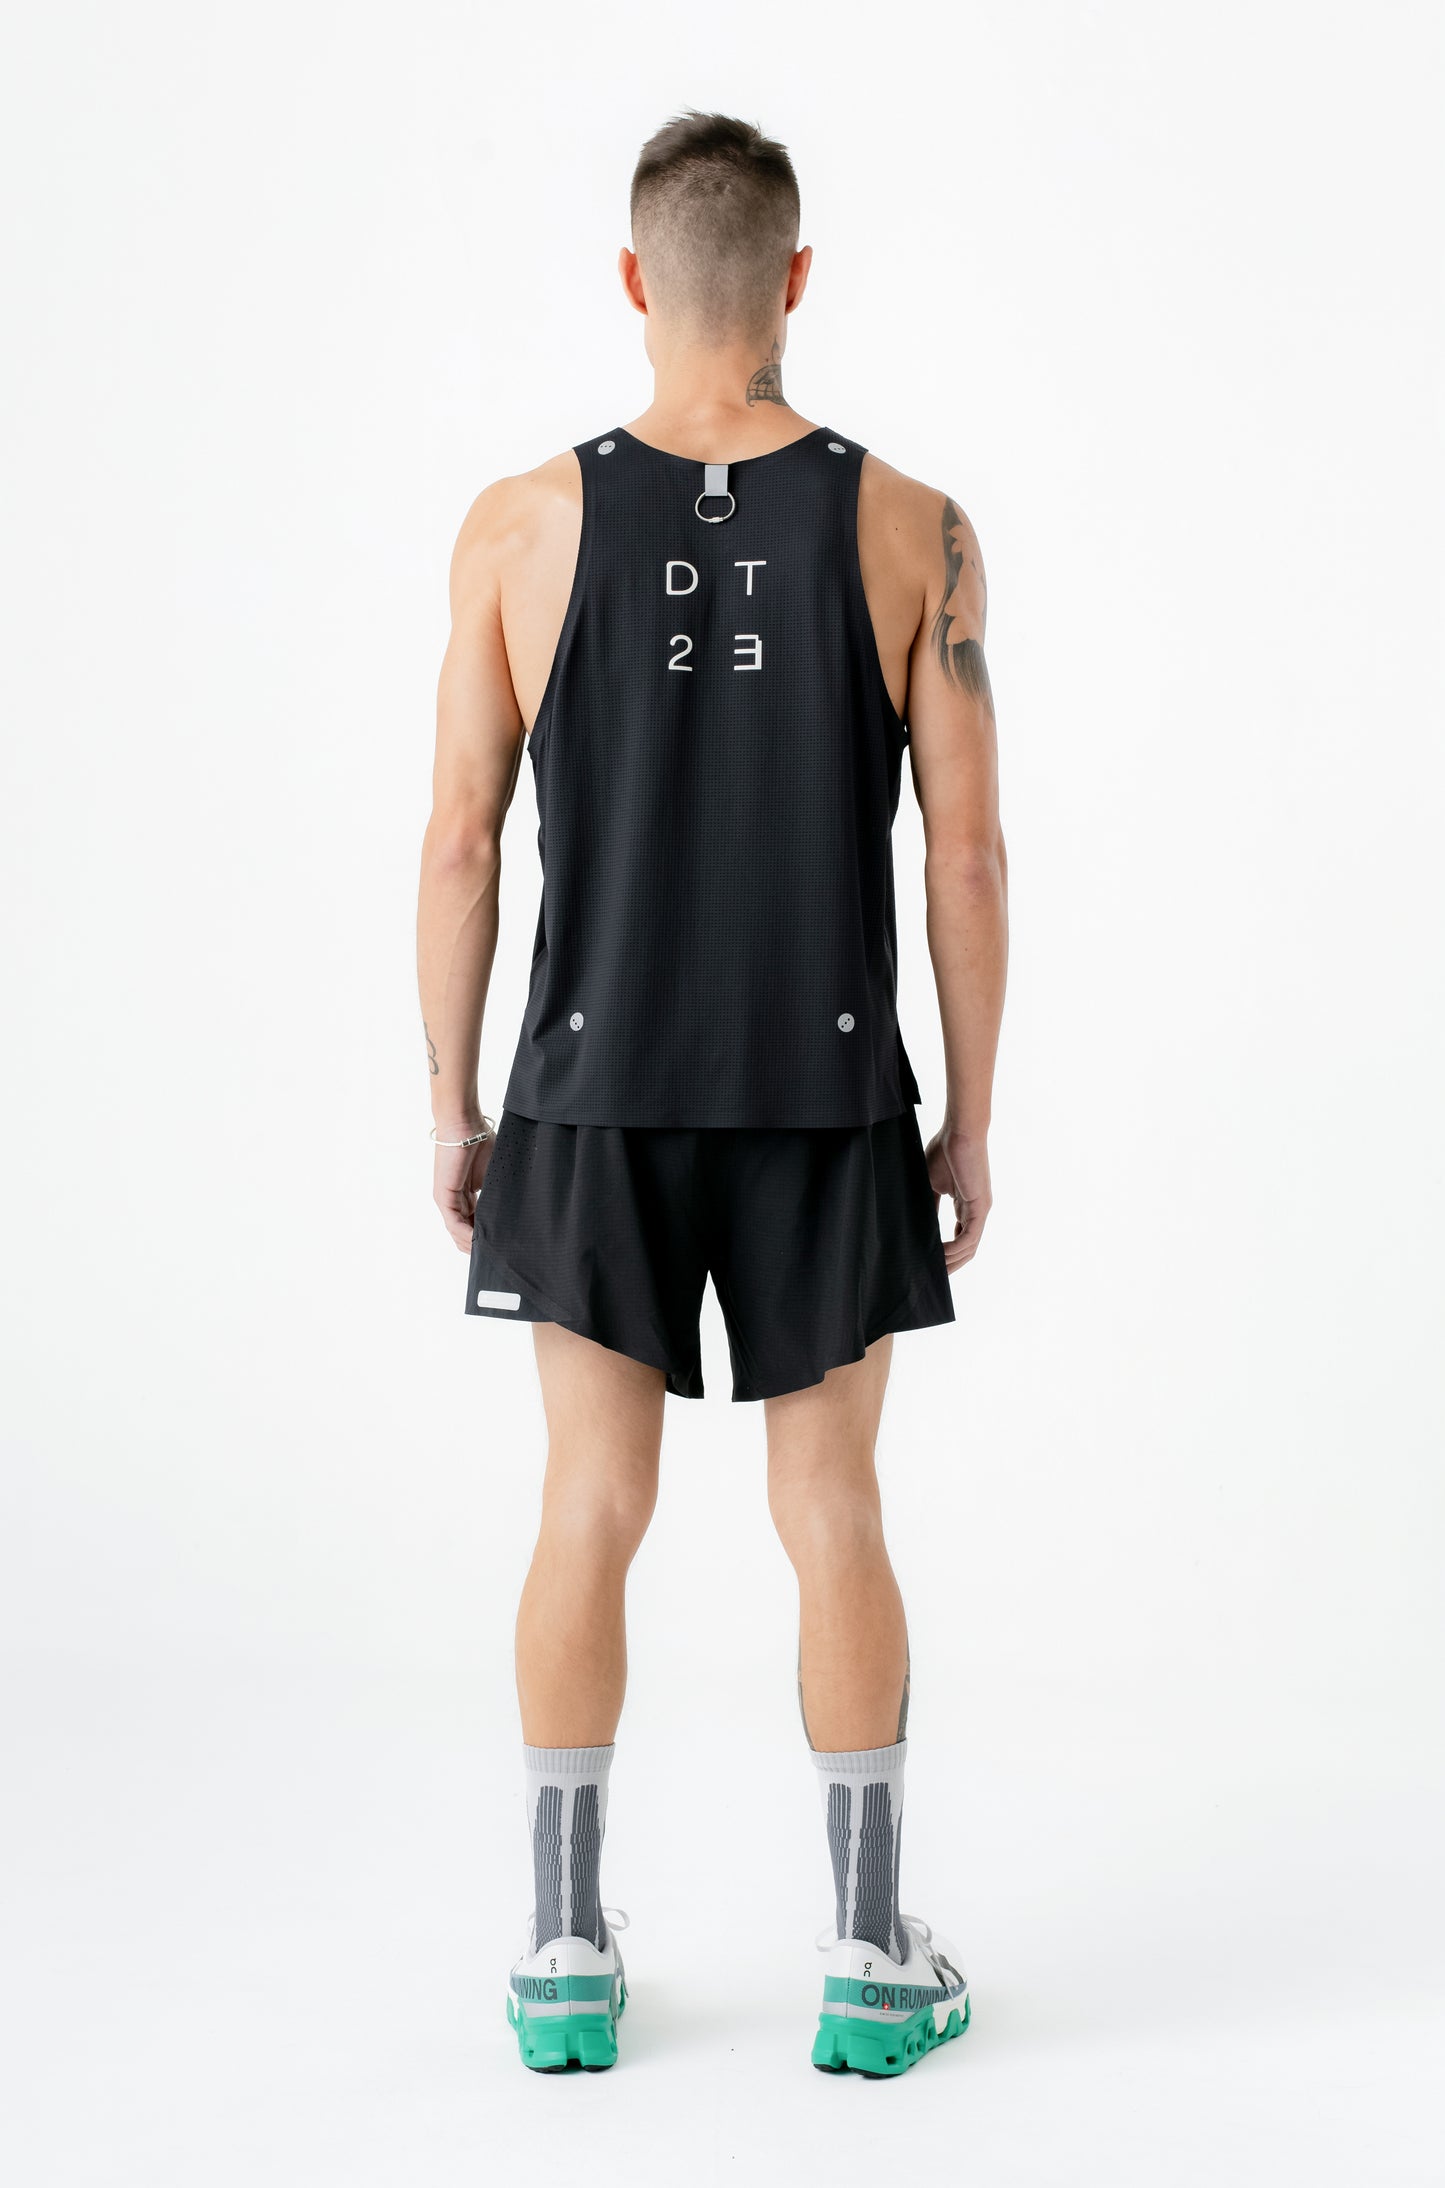 PACE - DT2 Airspots Tank Top "Black" - THE GAME